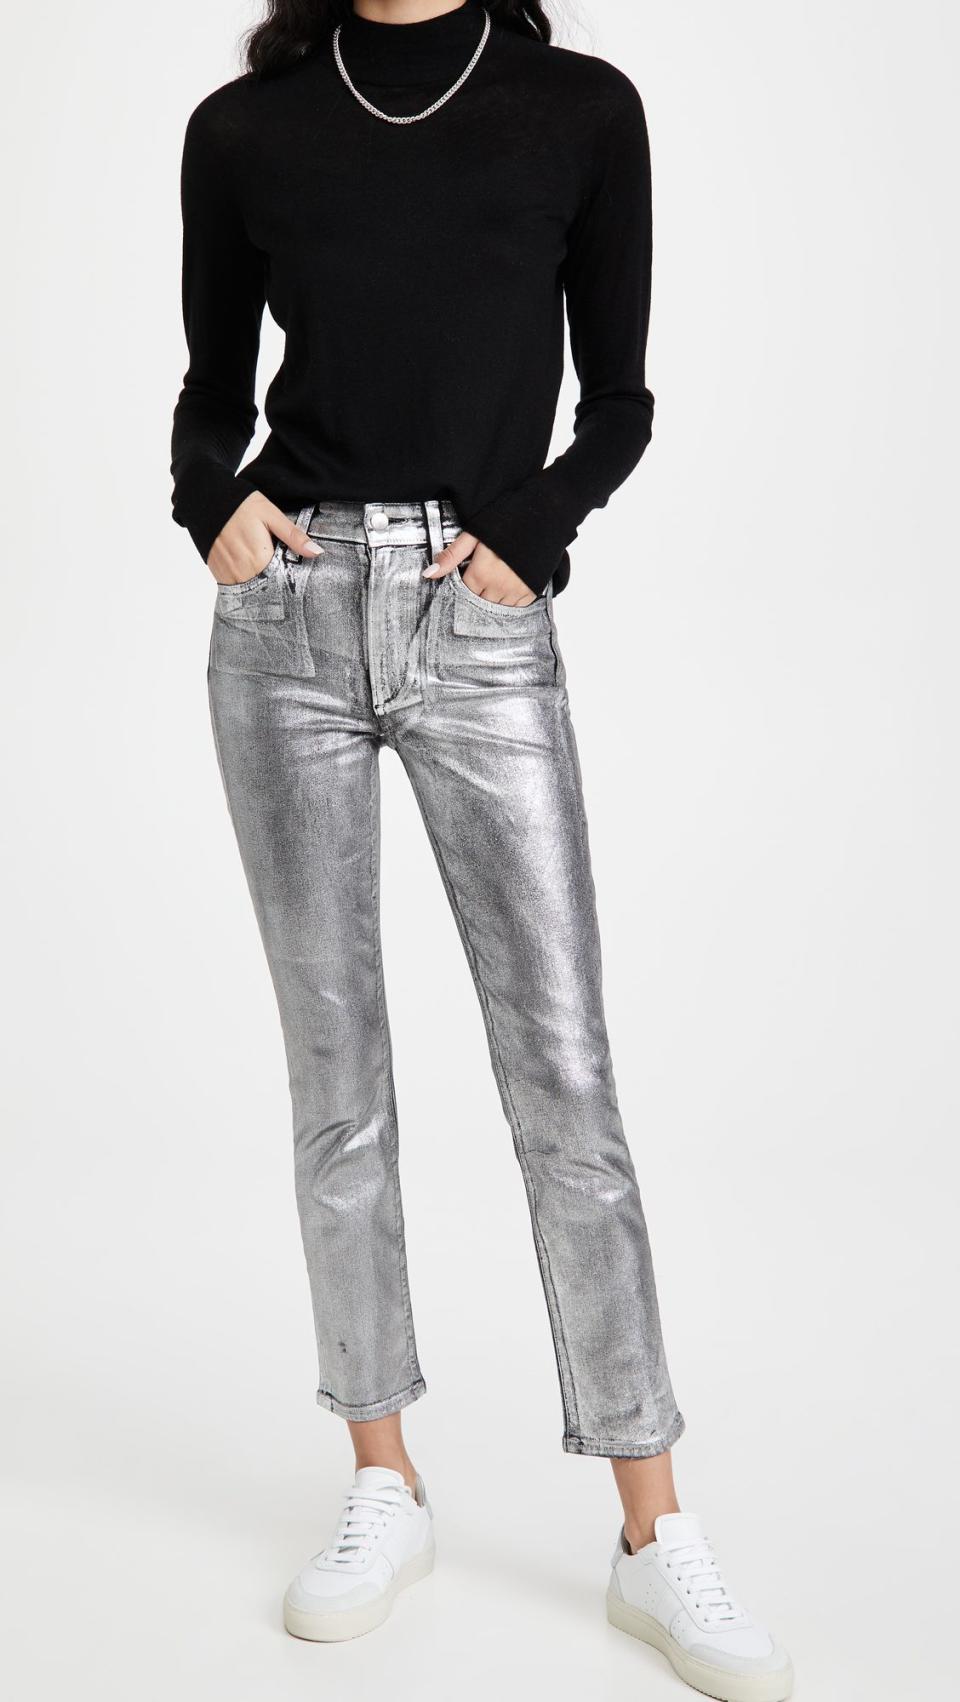 14) The Luna Ankle Metallic Lacquer Jeans